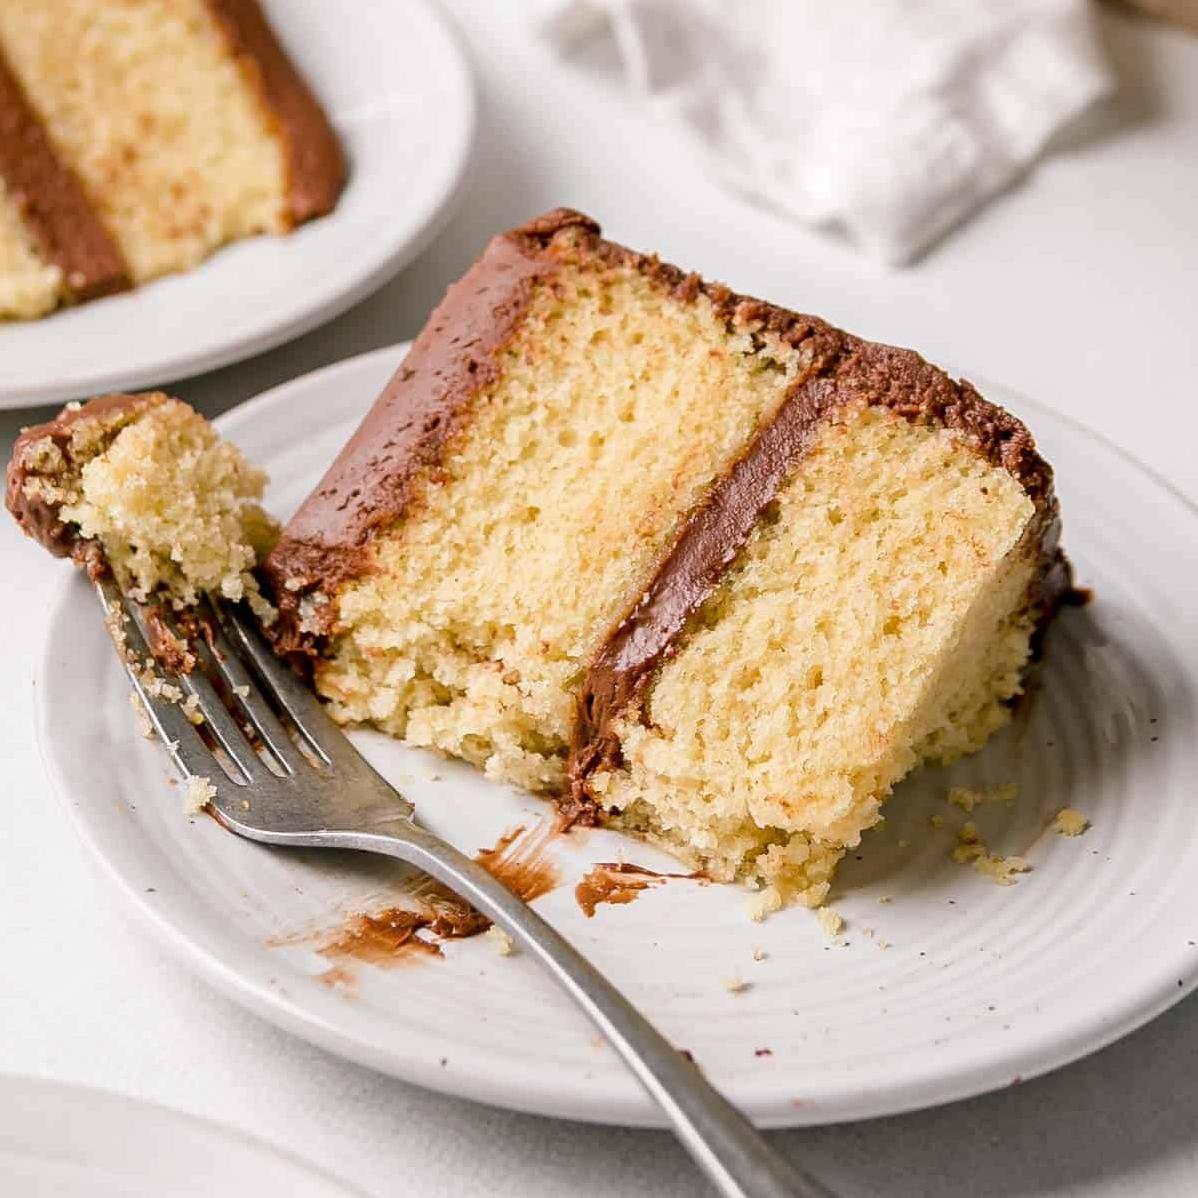  Brighten up your day with a slice of this sunny and delicious gluten-free cake.